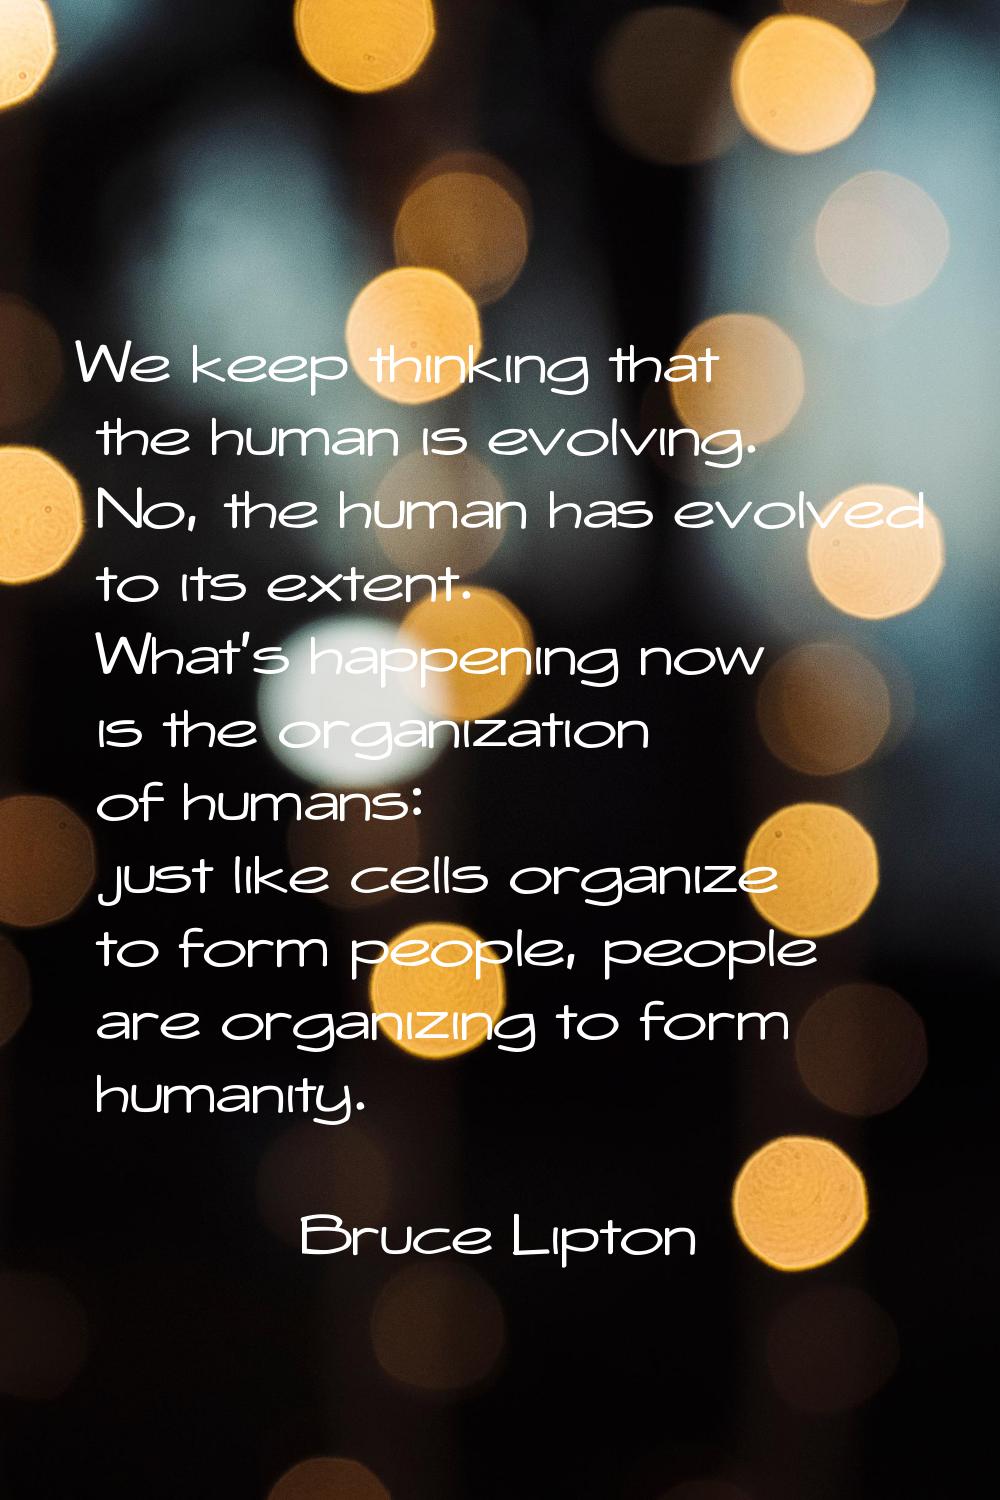 We keep thinking that the human is evolving. No, the human has evolved to its extent. What's happen